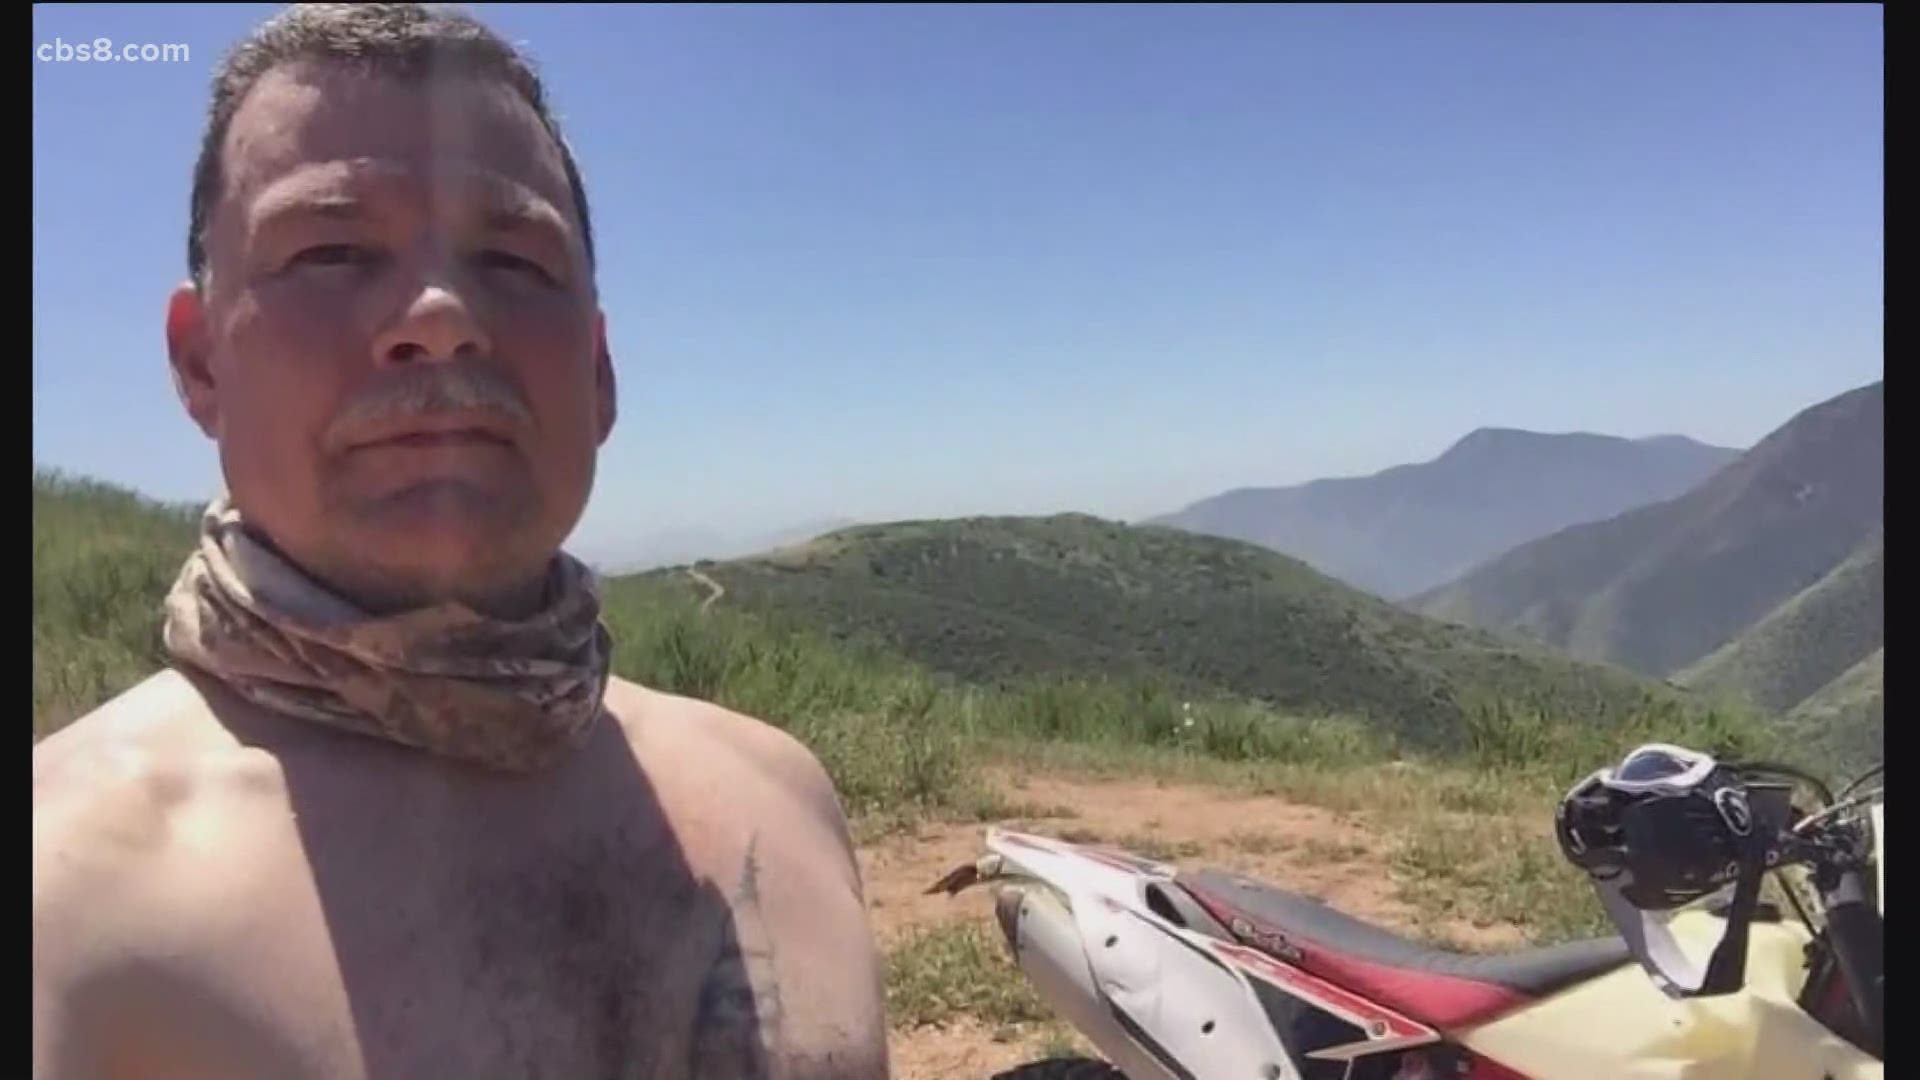 Roberto “Bobby” Camou, 48, headed out into the Otay Mountain wilderness area Saturday morning and sent a selfie from the area to family members around midday.